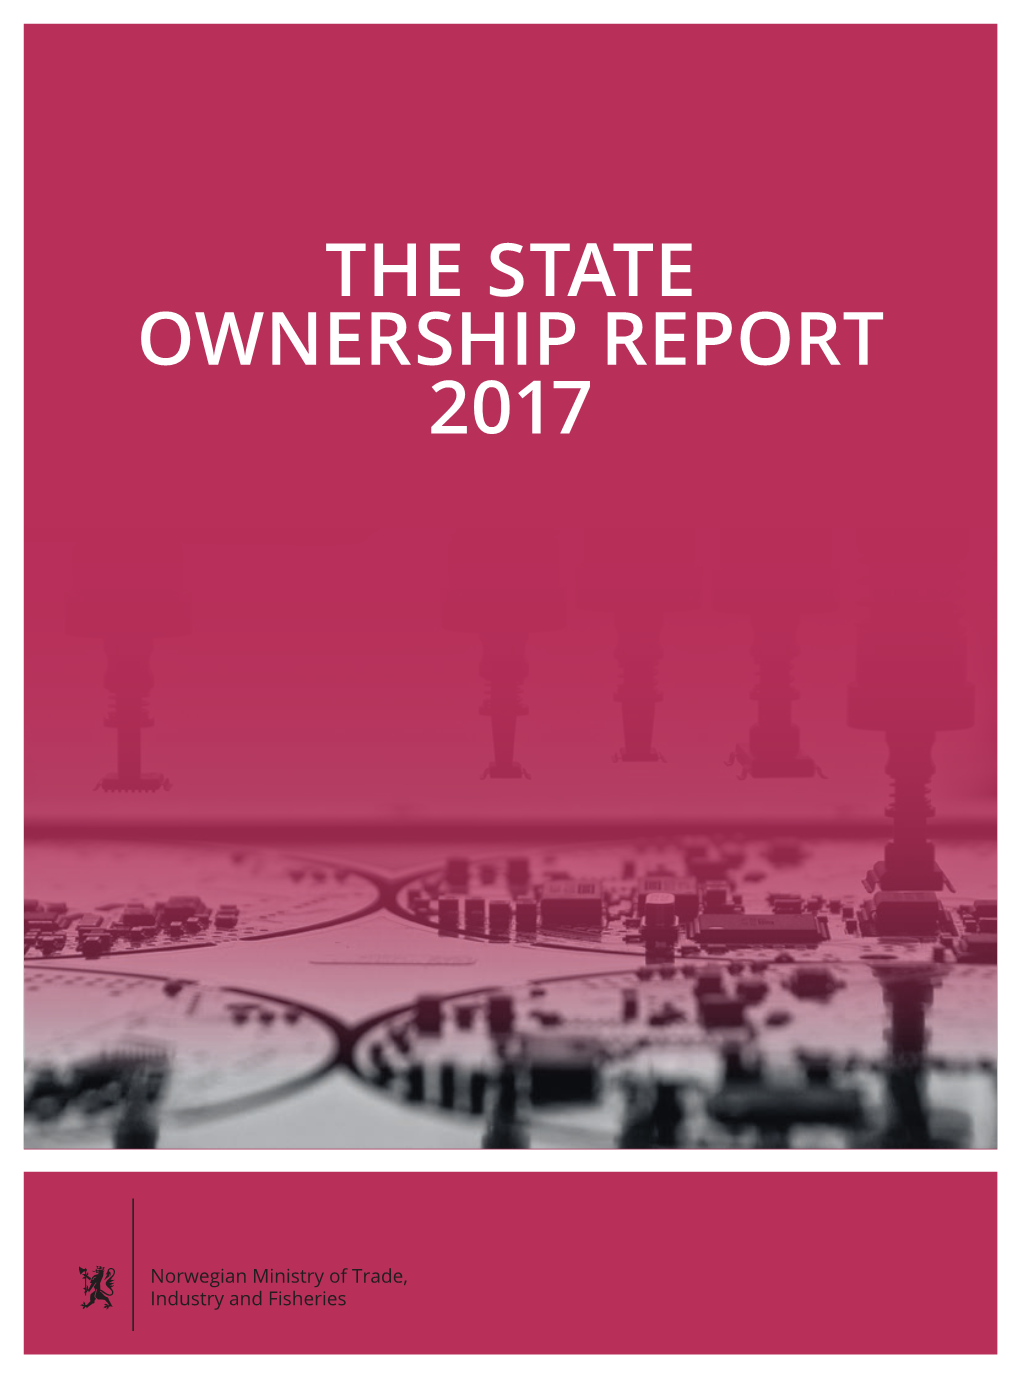 The State Ownership Report 2017